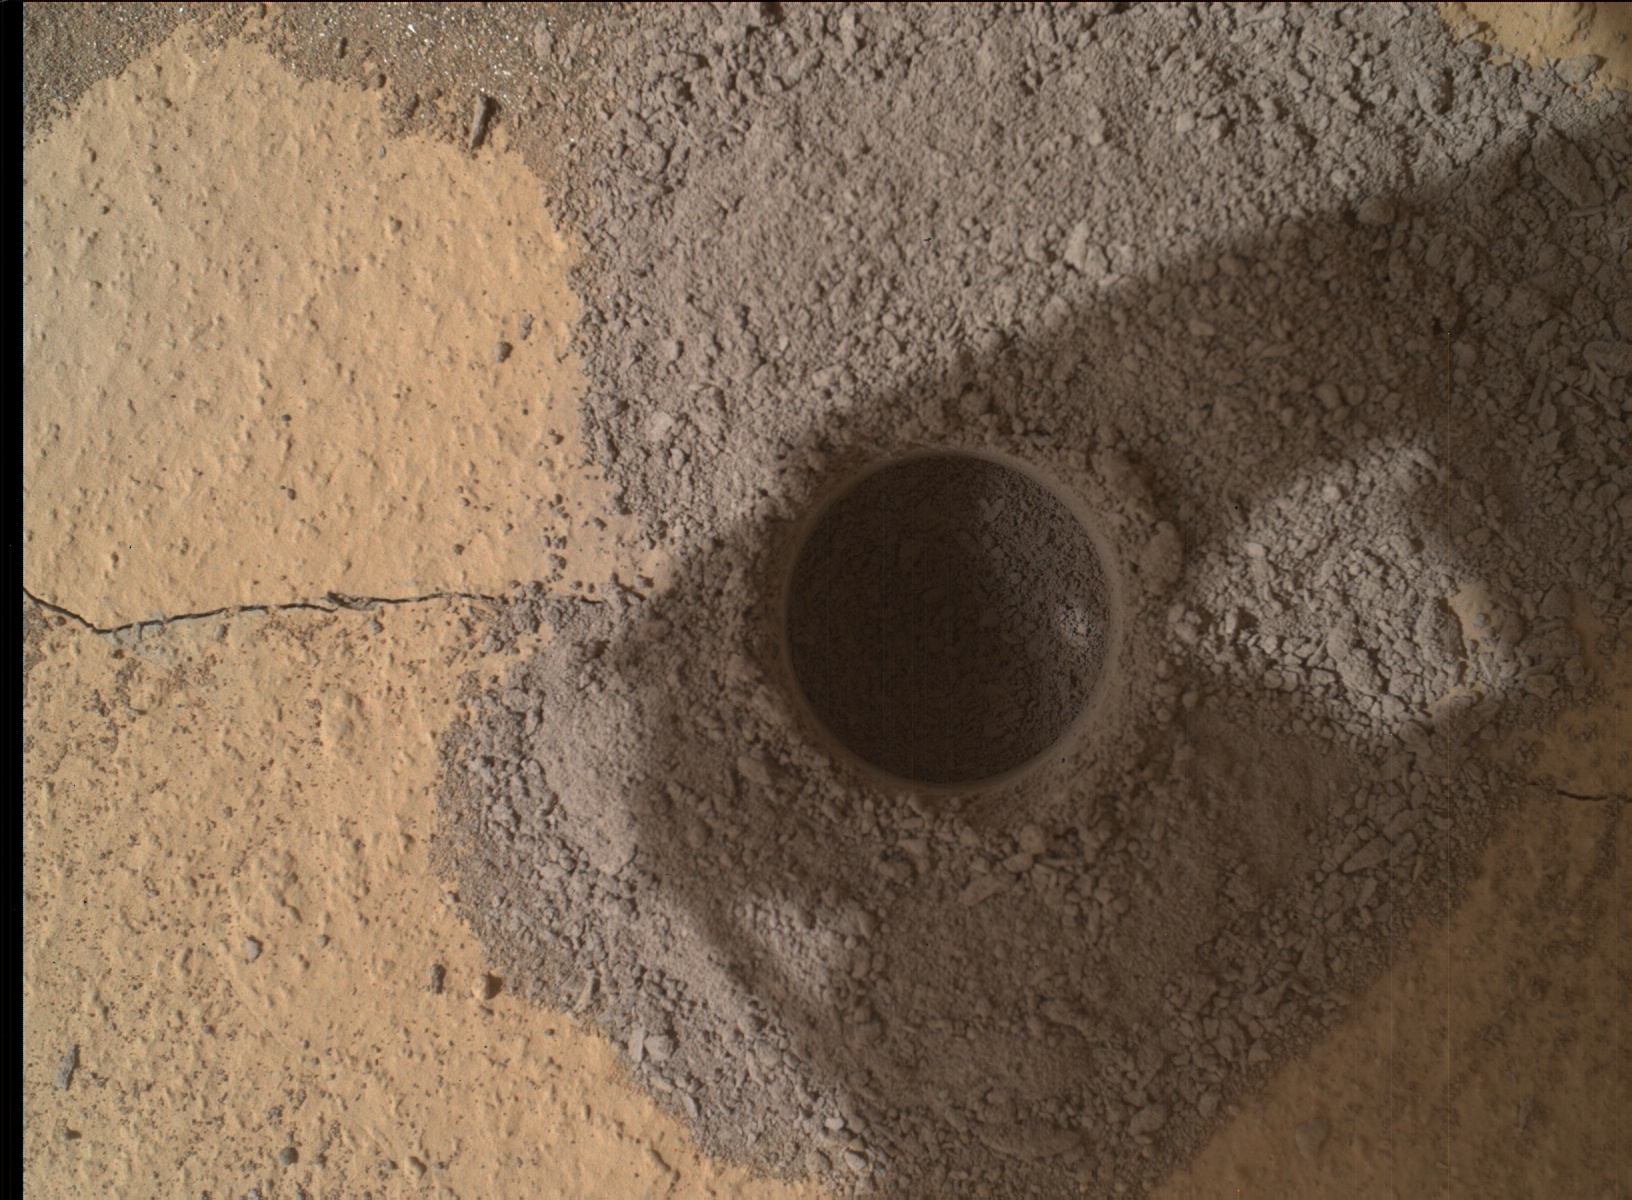 Nasa's Mars rover Curiosity acquired this image using its Mars Hand Lens Imager (MAHLI) on Sol 756